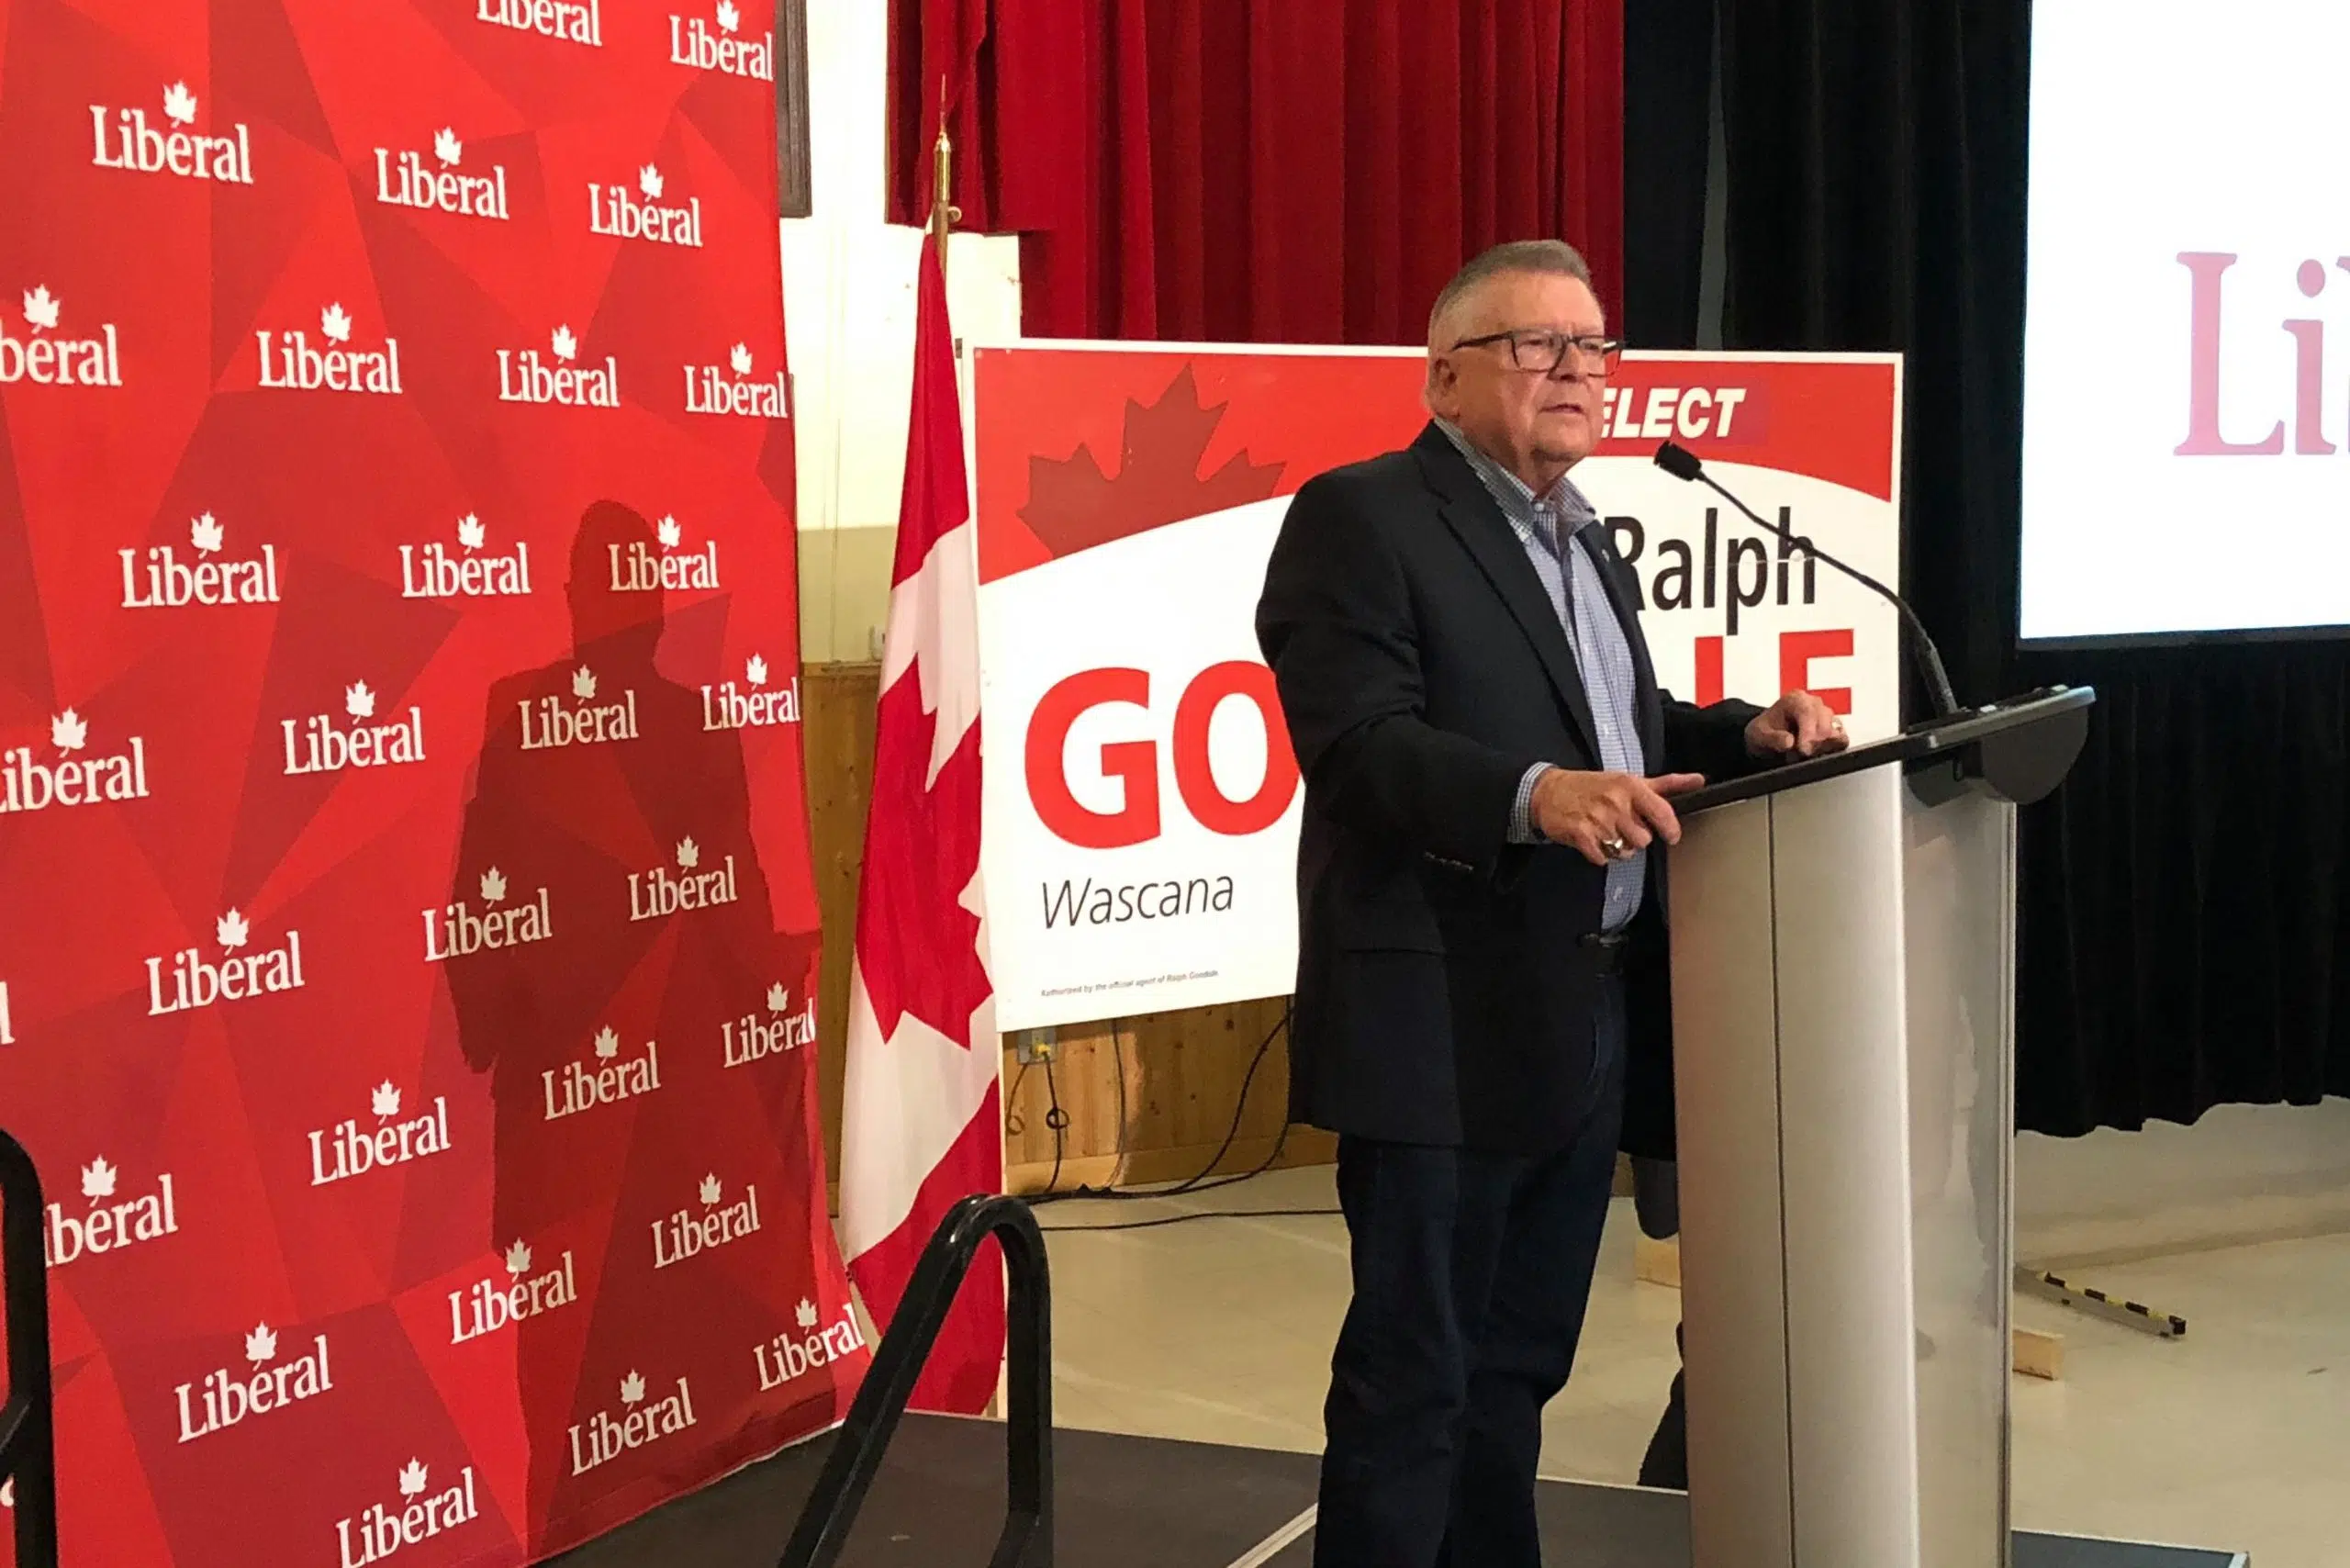 What does the future hold for Ralph Goodale?